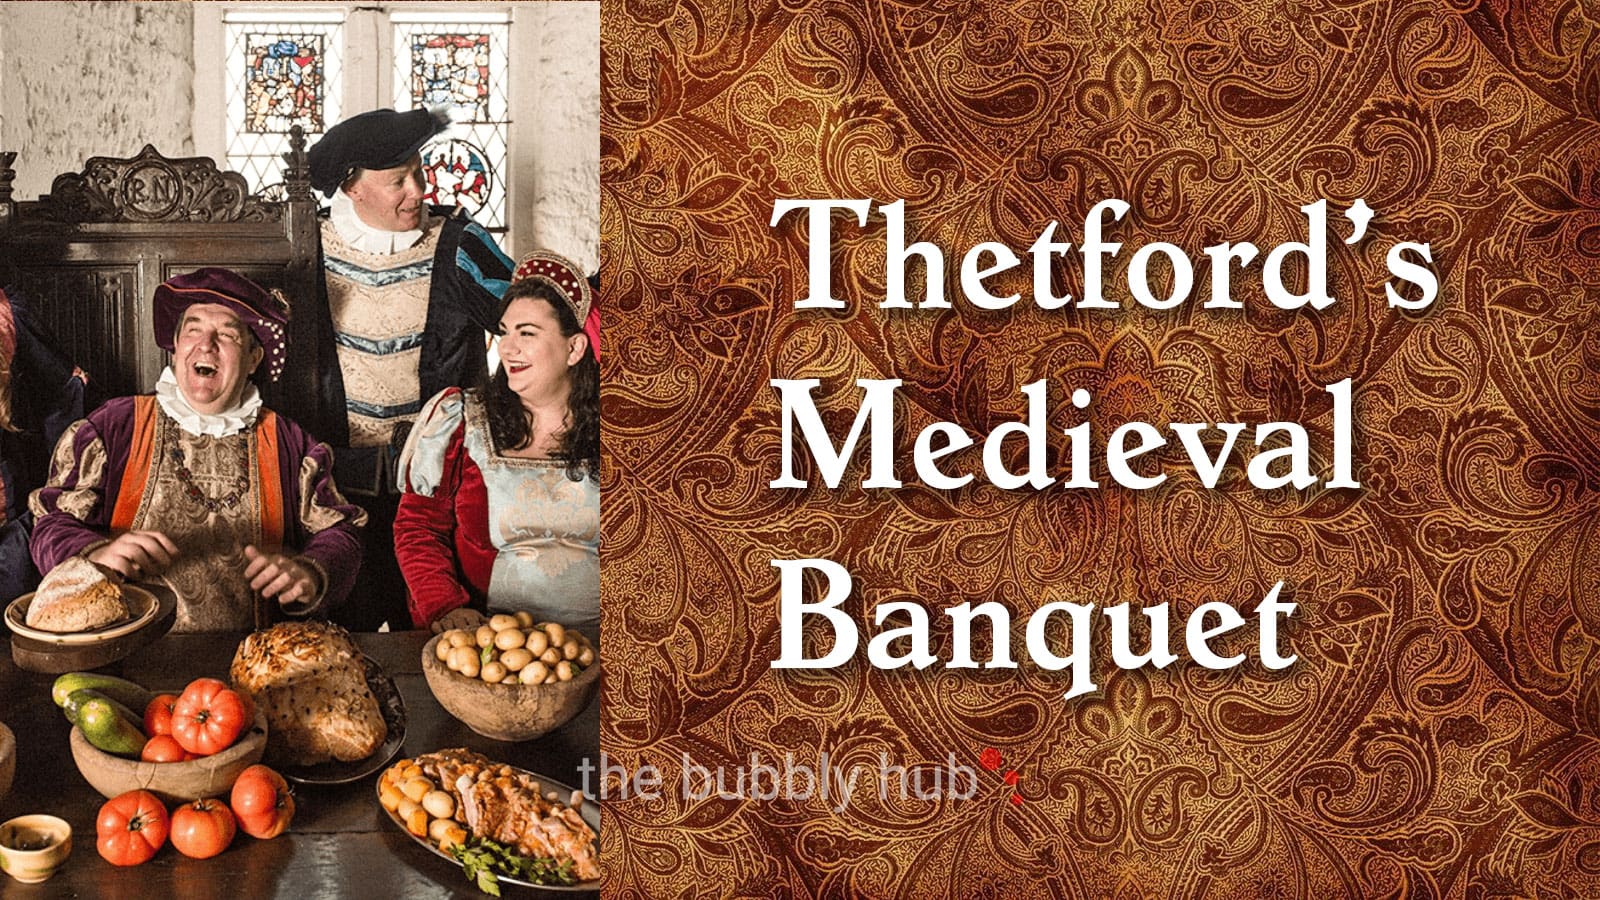 Thetford Bubbly Hub what's on and events Medieval Banquet